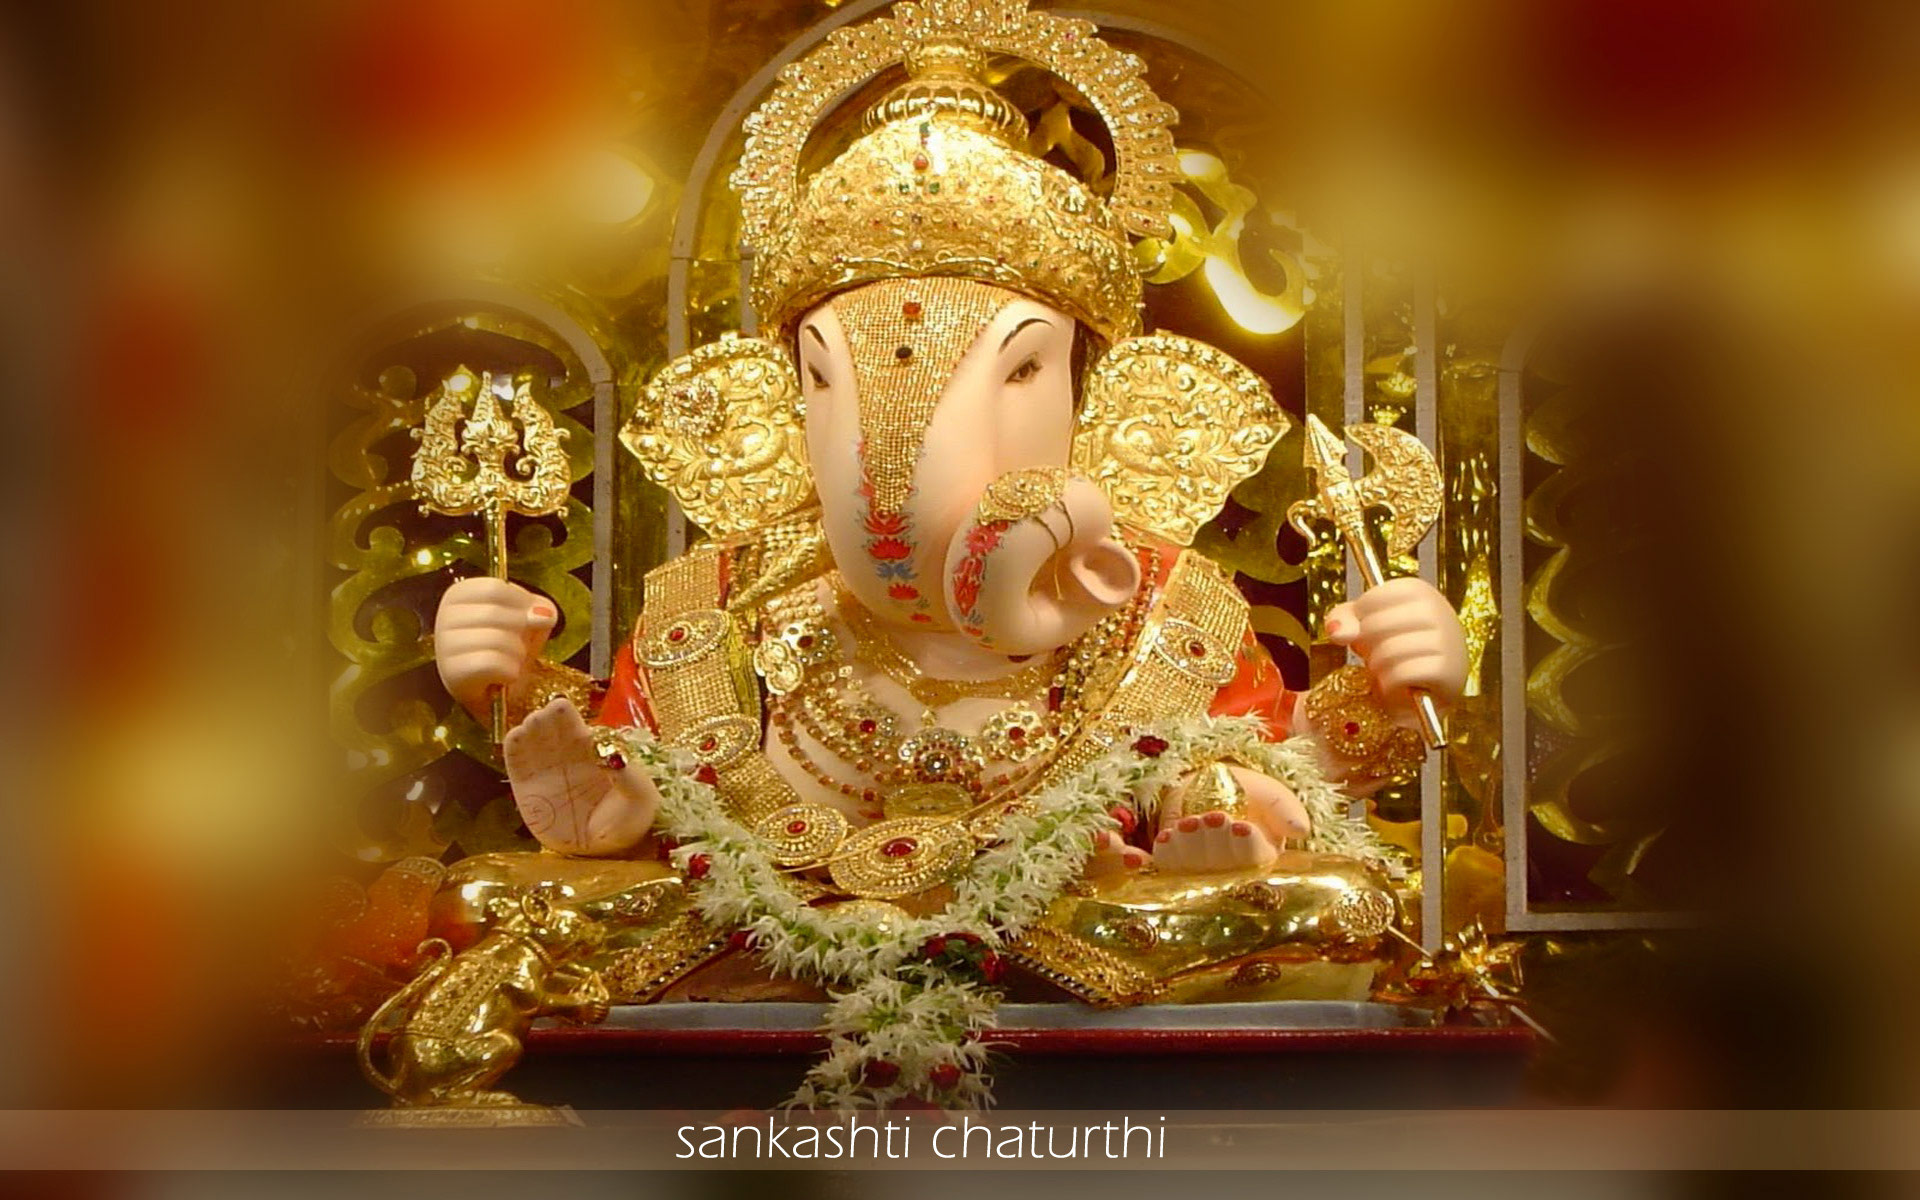 Celebrate Sankashti Chaturthi And Bring Prosperity The devotees must observe a full fast from morning till evening there is an interesting story related to the efficacy of sankashti chaturthi. celebrate sankashti chaturthi and bring